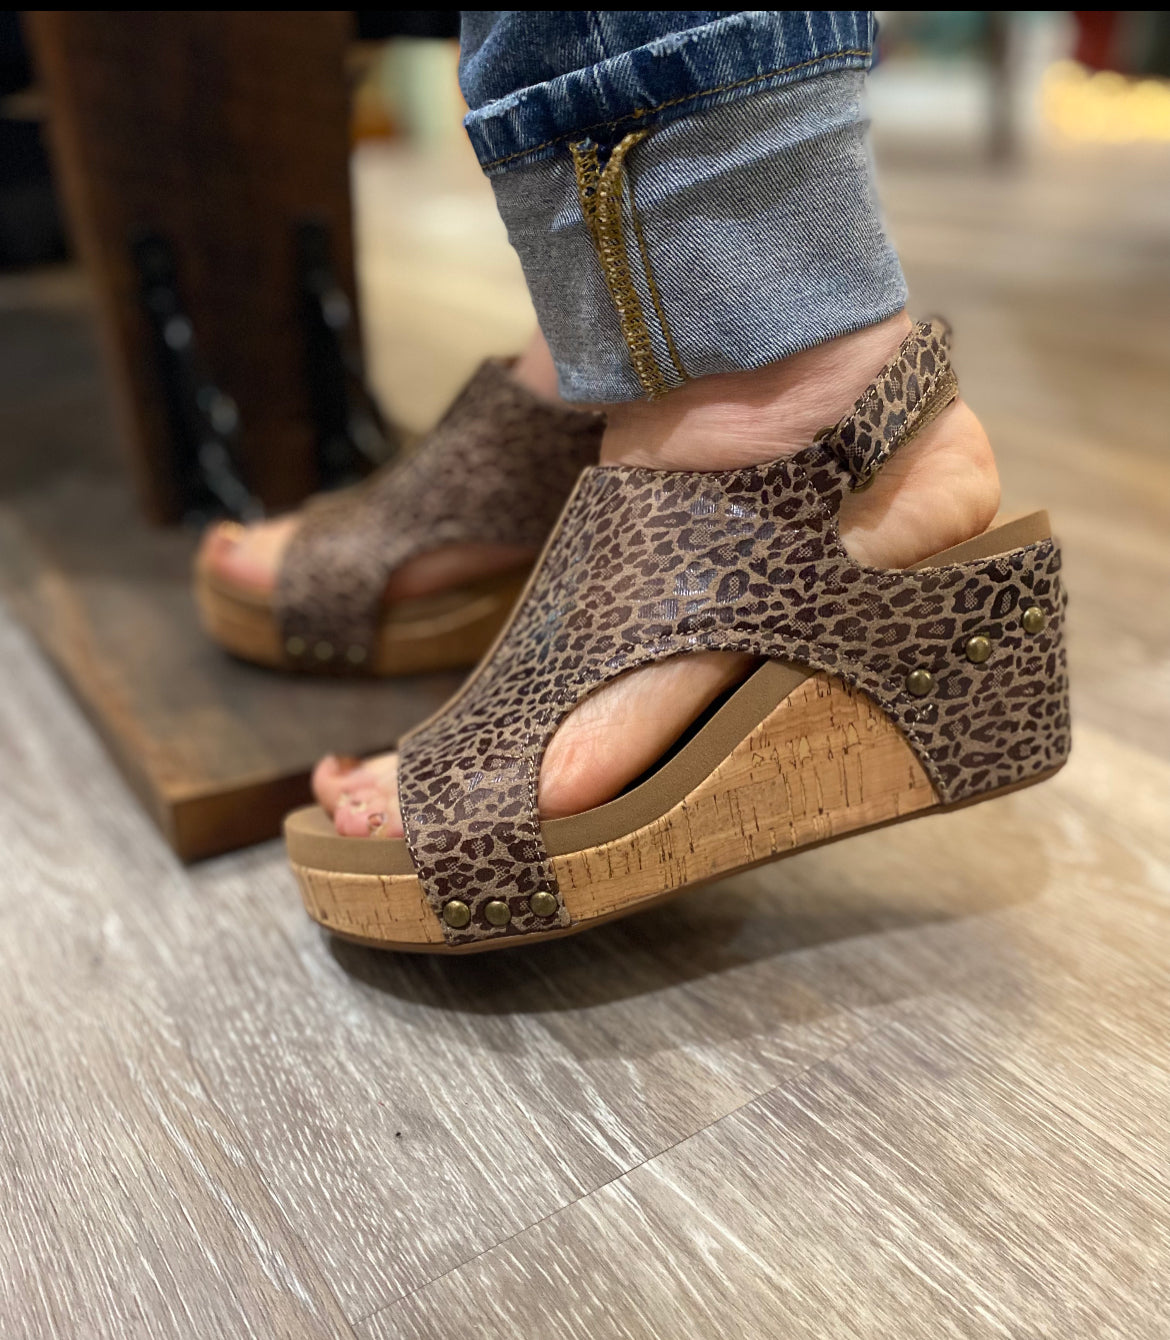 Corky's Carley Wedges